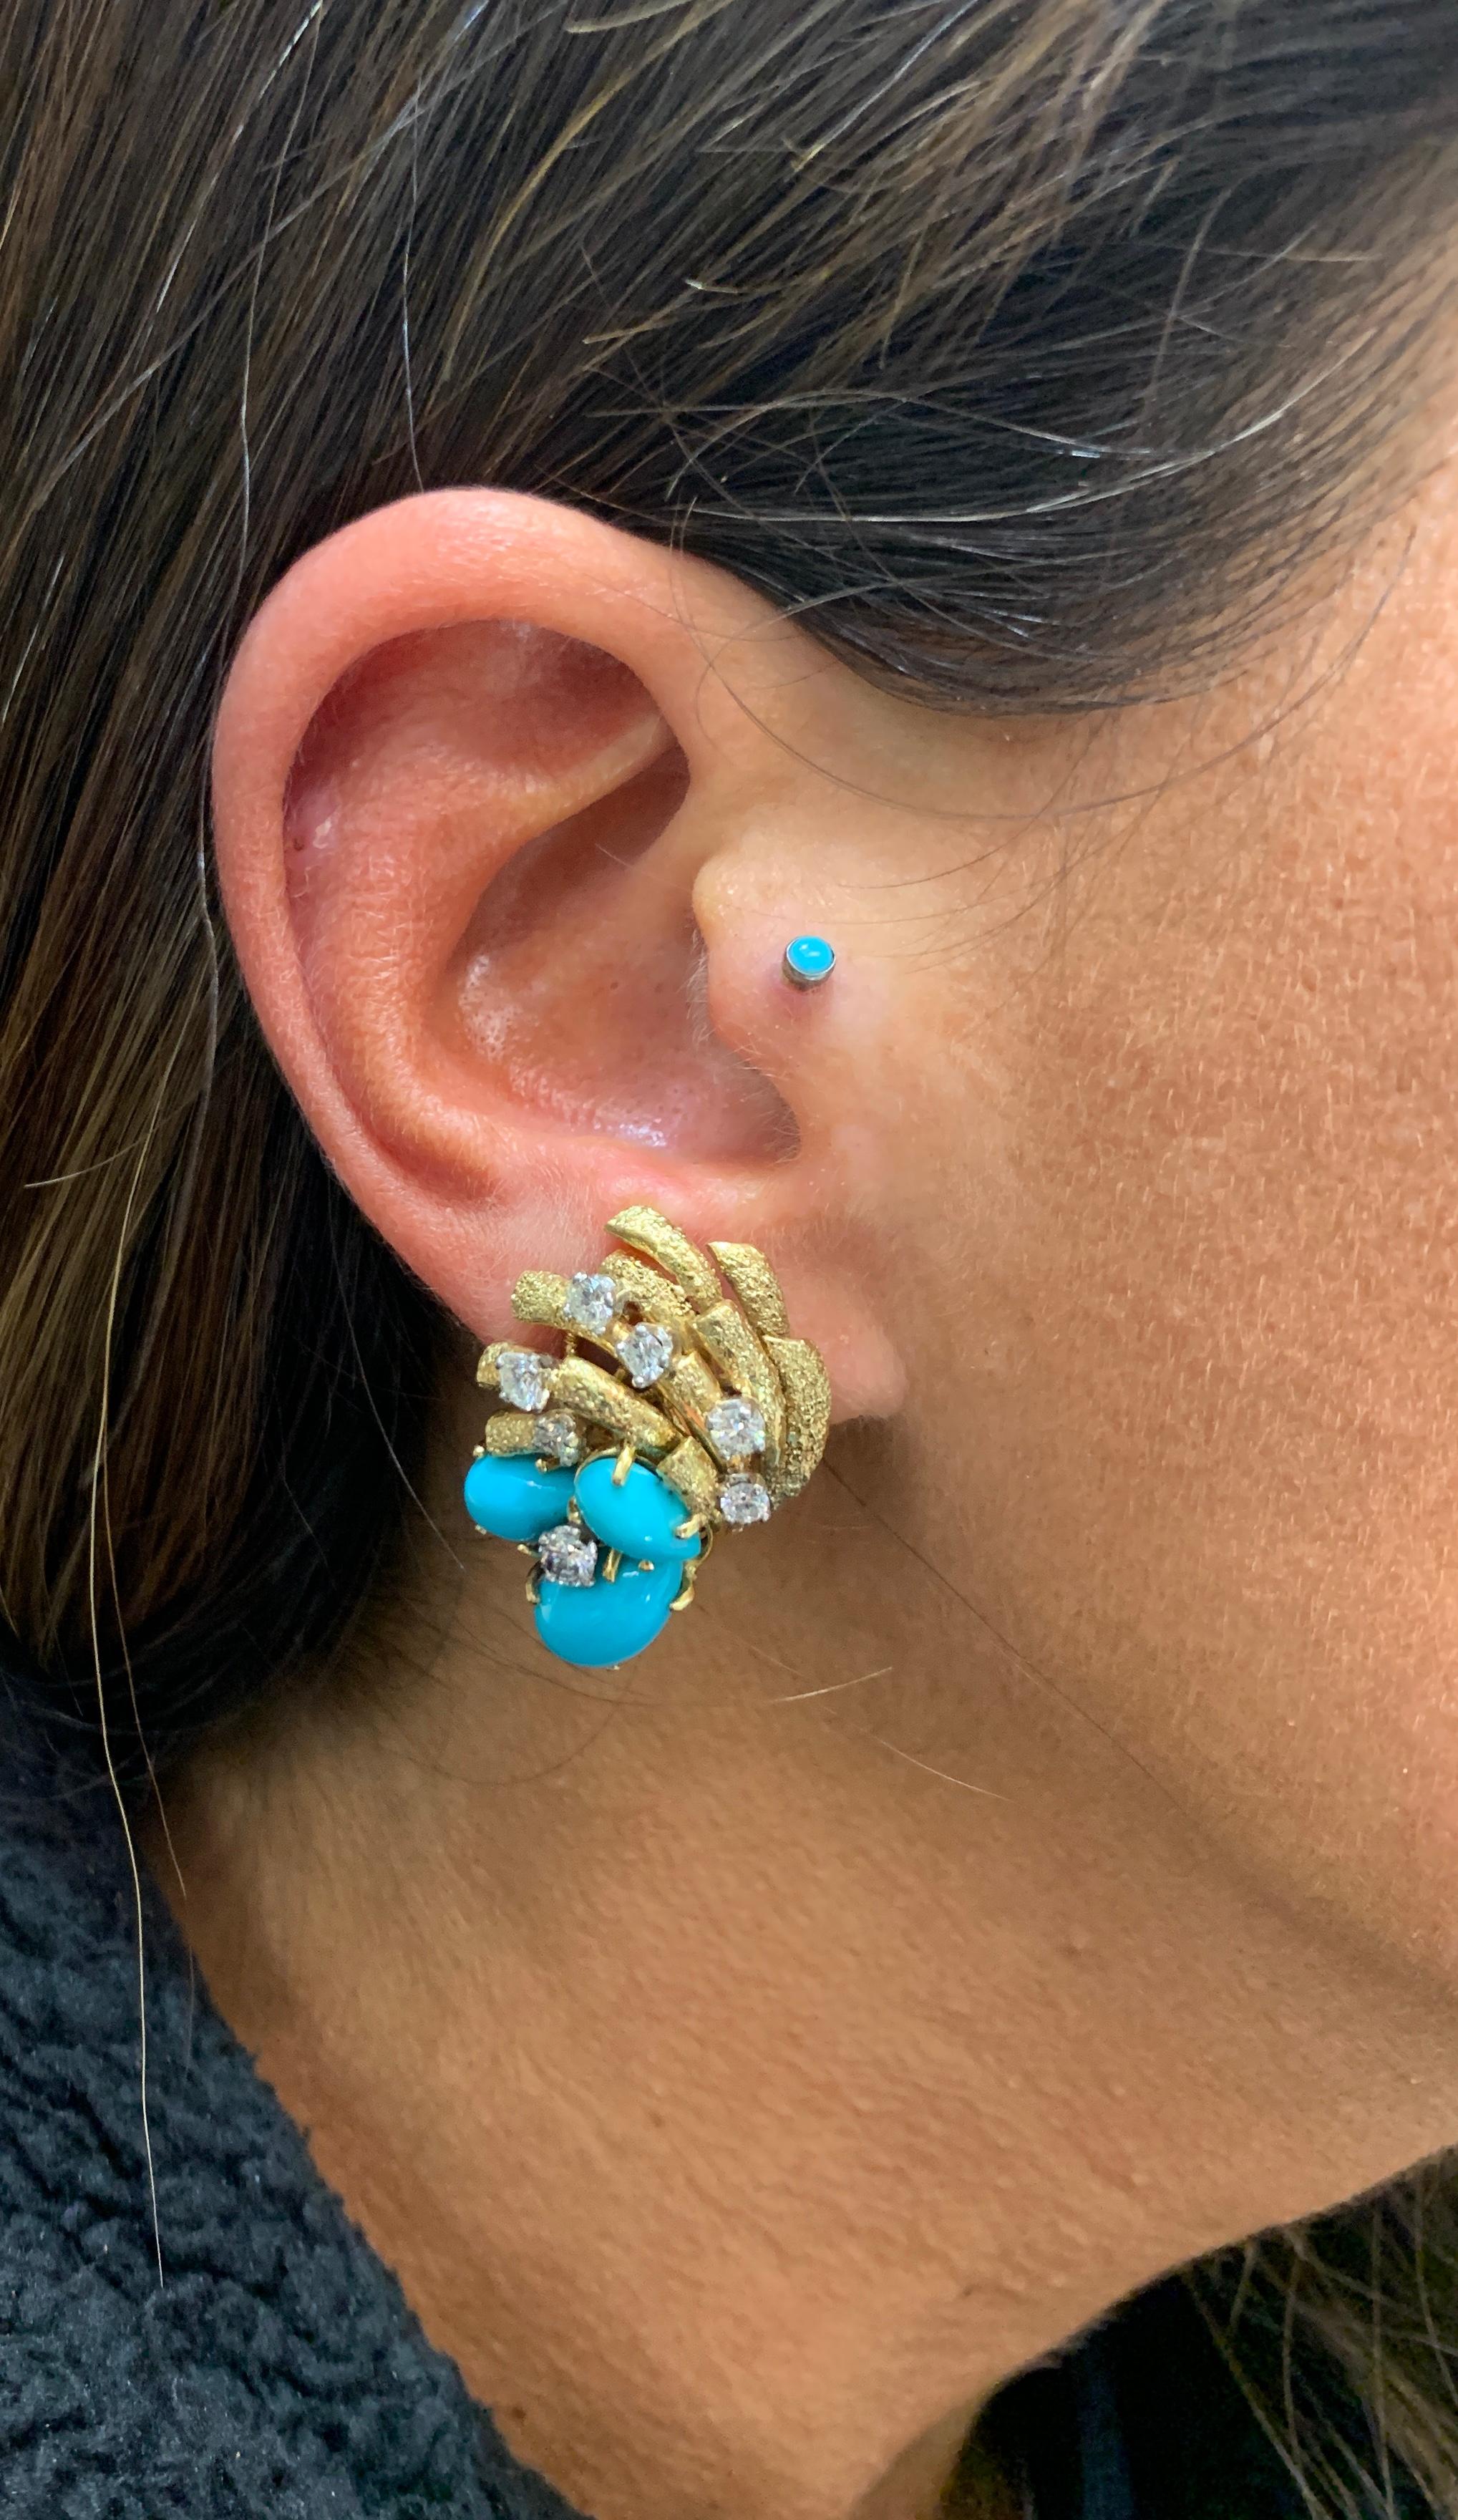 Women's Cartier Turquoise and Diamond Earrings